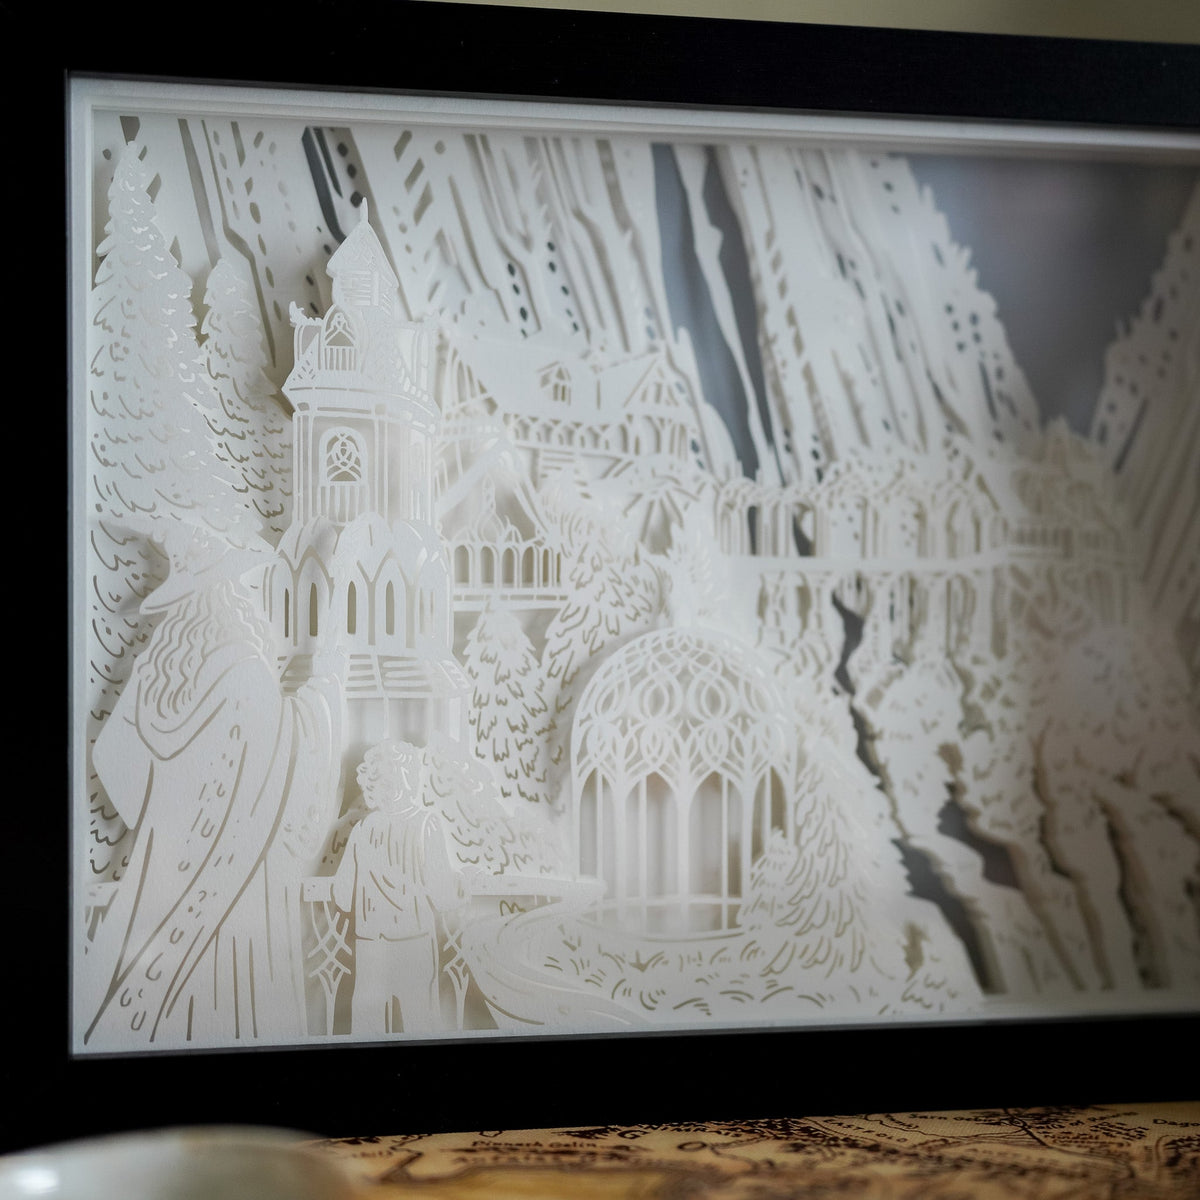 Elven Home Light Box is a blue and yellow light of a paper cut shadow box of a castle-like home in a valley